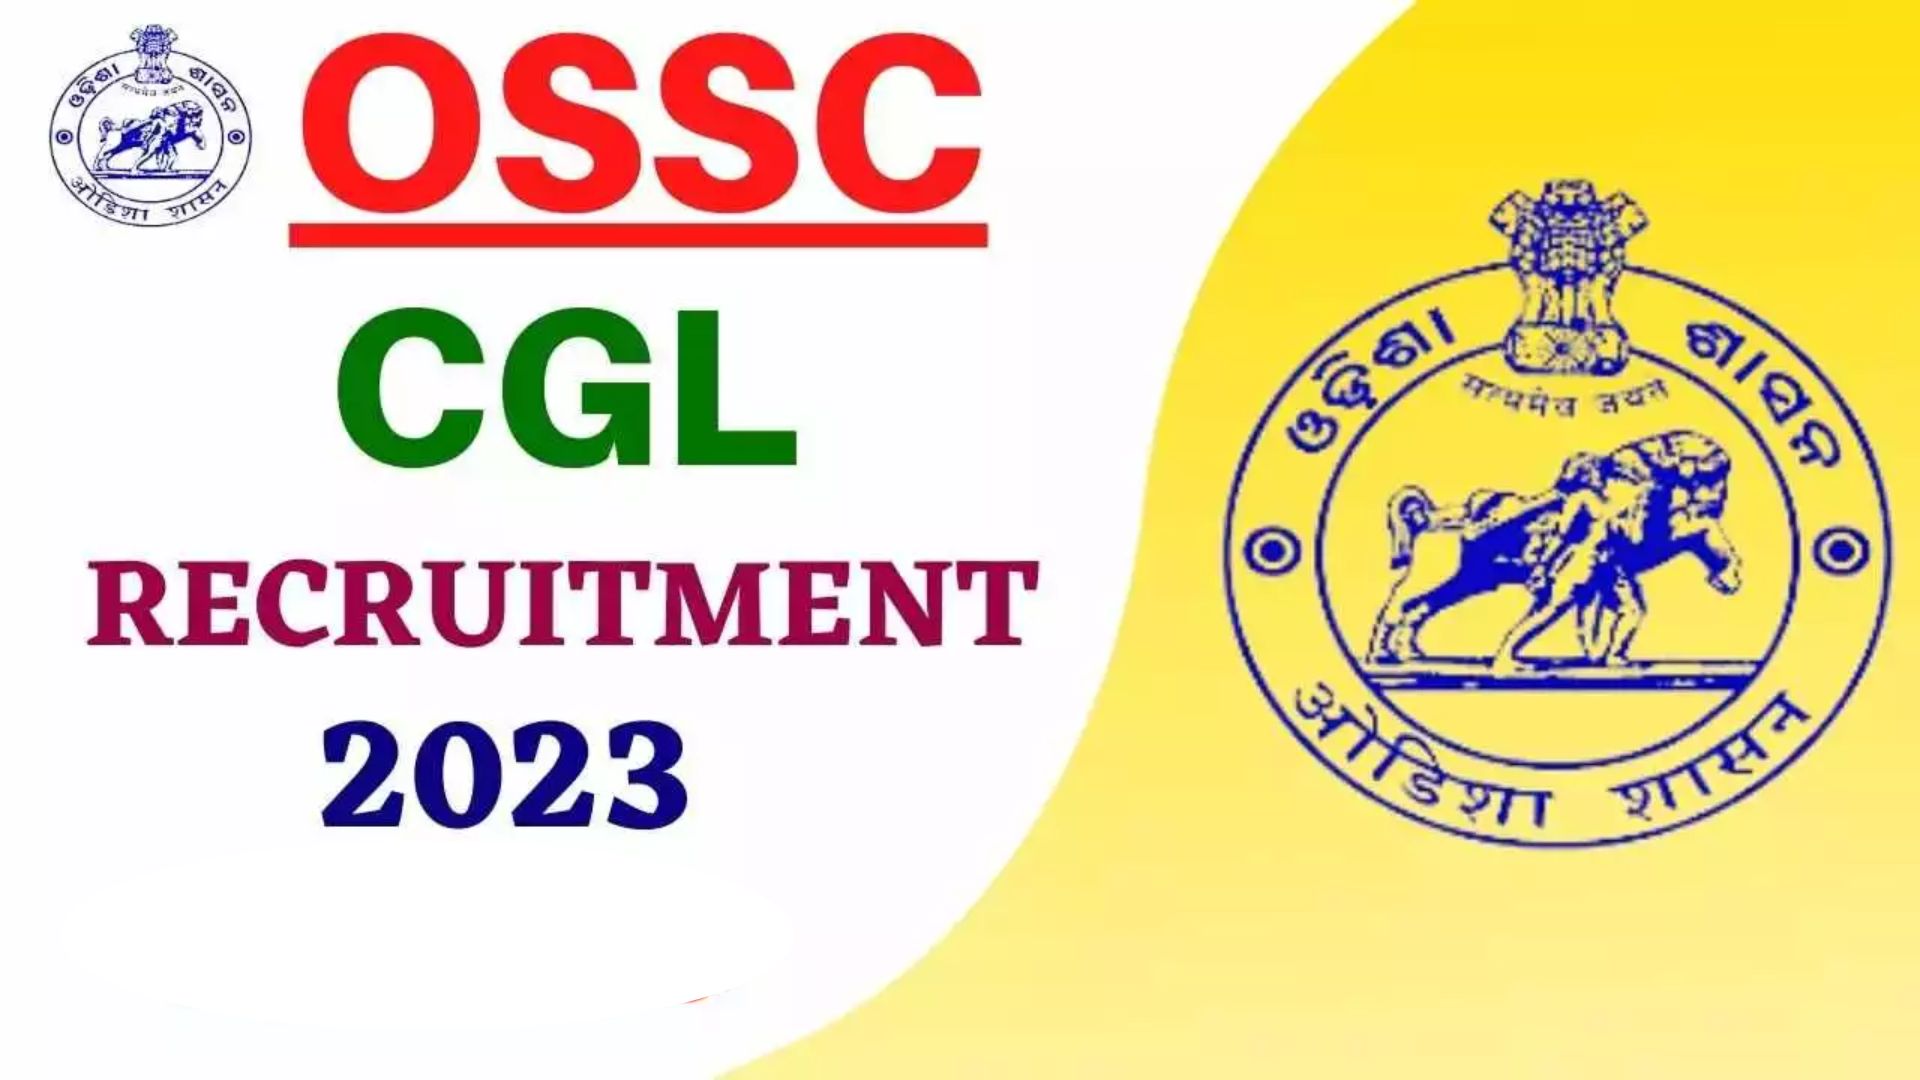 Apply For 495 Group B And Group C Posts At OSSC Recruitment 2023